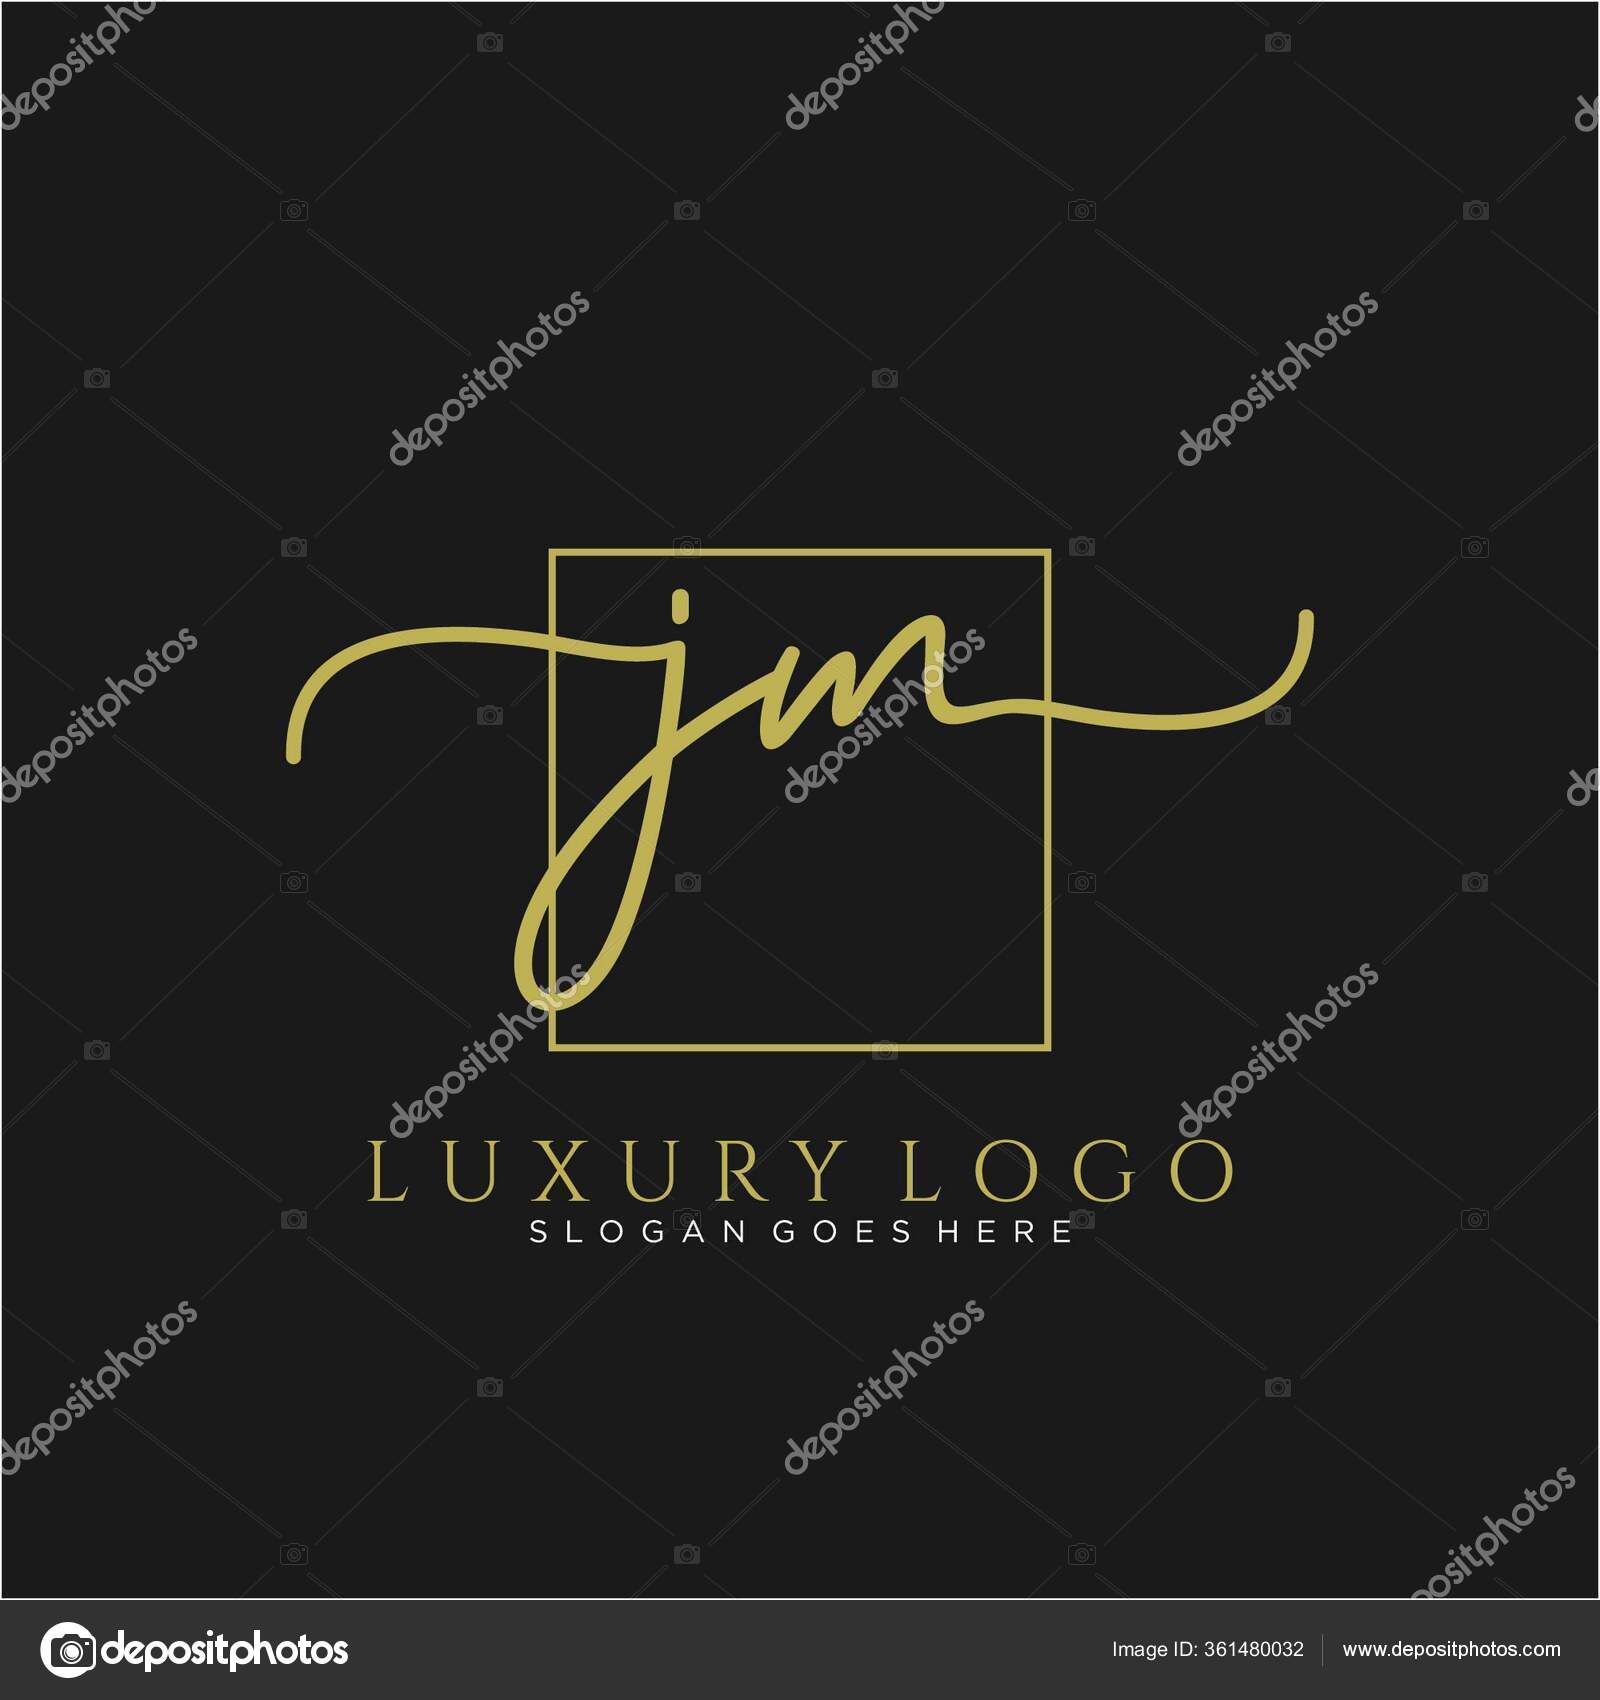 Initial VL handwriting logo with circle template vector logo of